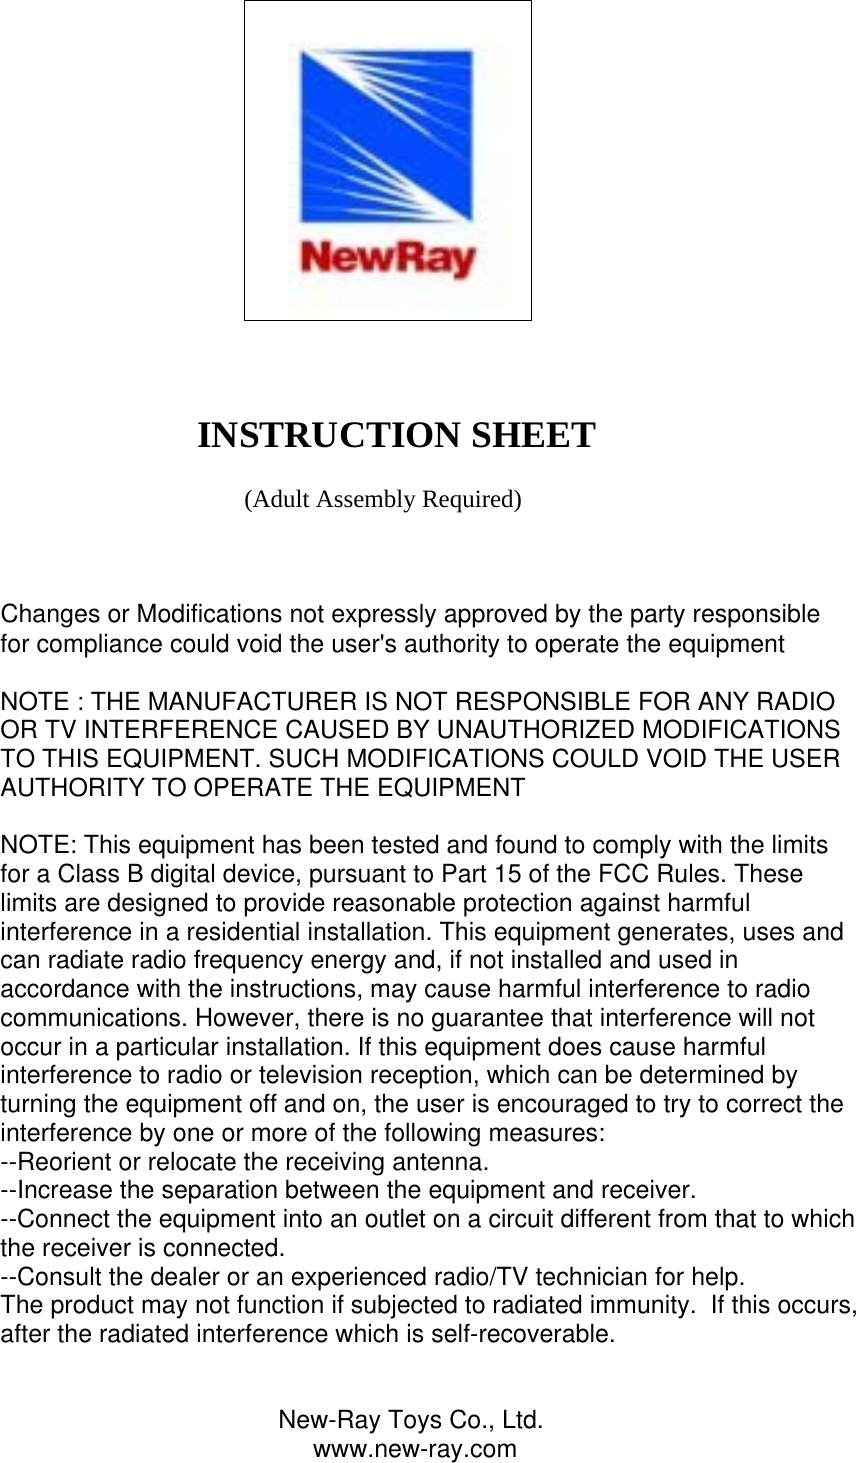                                                                                                                          INSTRUCTION SHEET                                           (Adult Assembly Required)    Changes or Modifications not expressly approved by the party responsiblefor compliance could void the user&apos;s authority to operate the equipment NOTE : THE MANUFACTURER IS NOT RESPONSIBLE FOR ANY RADIO OR TV INTERFERENCE CAUSED BY UNAUTHORIZED MODIFICATIONS TO THIS EQUIPMENT. SUCH MODIFICATIONS COULD VOID THE USER AUTHORITY TO OPERATE THE EQUIPMENT  NOTE: This equipment has been tested and found to comply with the limits for a Class B digital device, pursuant to Part 15 of the FCC Rules. These limits are designed to provide reasonable protection against harmful interference in a residential installation. This equipment generates, uses and can radiate radio frequency energy and, if not installed and used in accordance with the instructions, may cause harmful interference to radio communications. However, there is no guarantee that interference will not occur in a particular installation. If this equipment does cause harmful interference to radio or television reception, which can be determined by turning the equipment off and on, the user is encouraged to try to correct the interference by one or more of the following measures: --Reorient or relocate the receiving antenna. --Increase the separation between the equipment and receiver. --Connect the equipment into an outlet on a circuit different from that to which the receiver is connected. --Consult the dealer or an experienced radio/TV technician for help. The product may not function if subjected to radiated immunity.  If this occurs, after the radiated interference which is self-recoverable.                                           New-Ray Toys Co., Ltd.                                              www.new-ray.com 